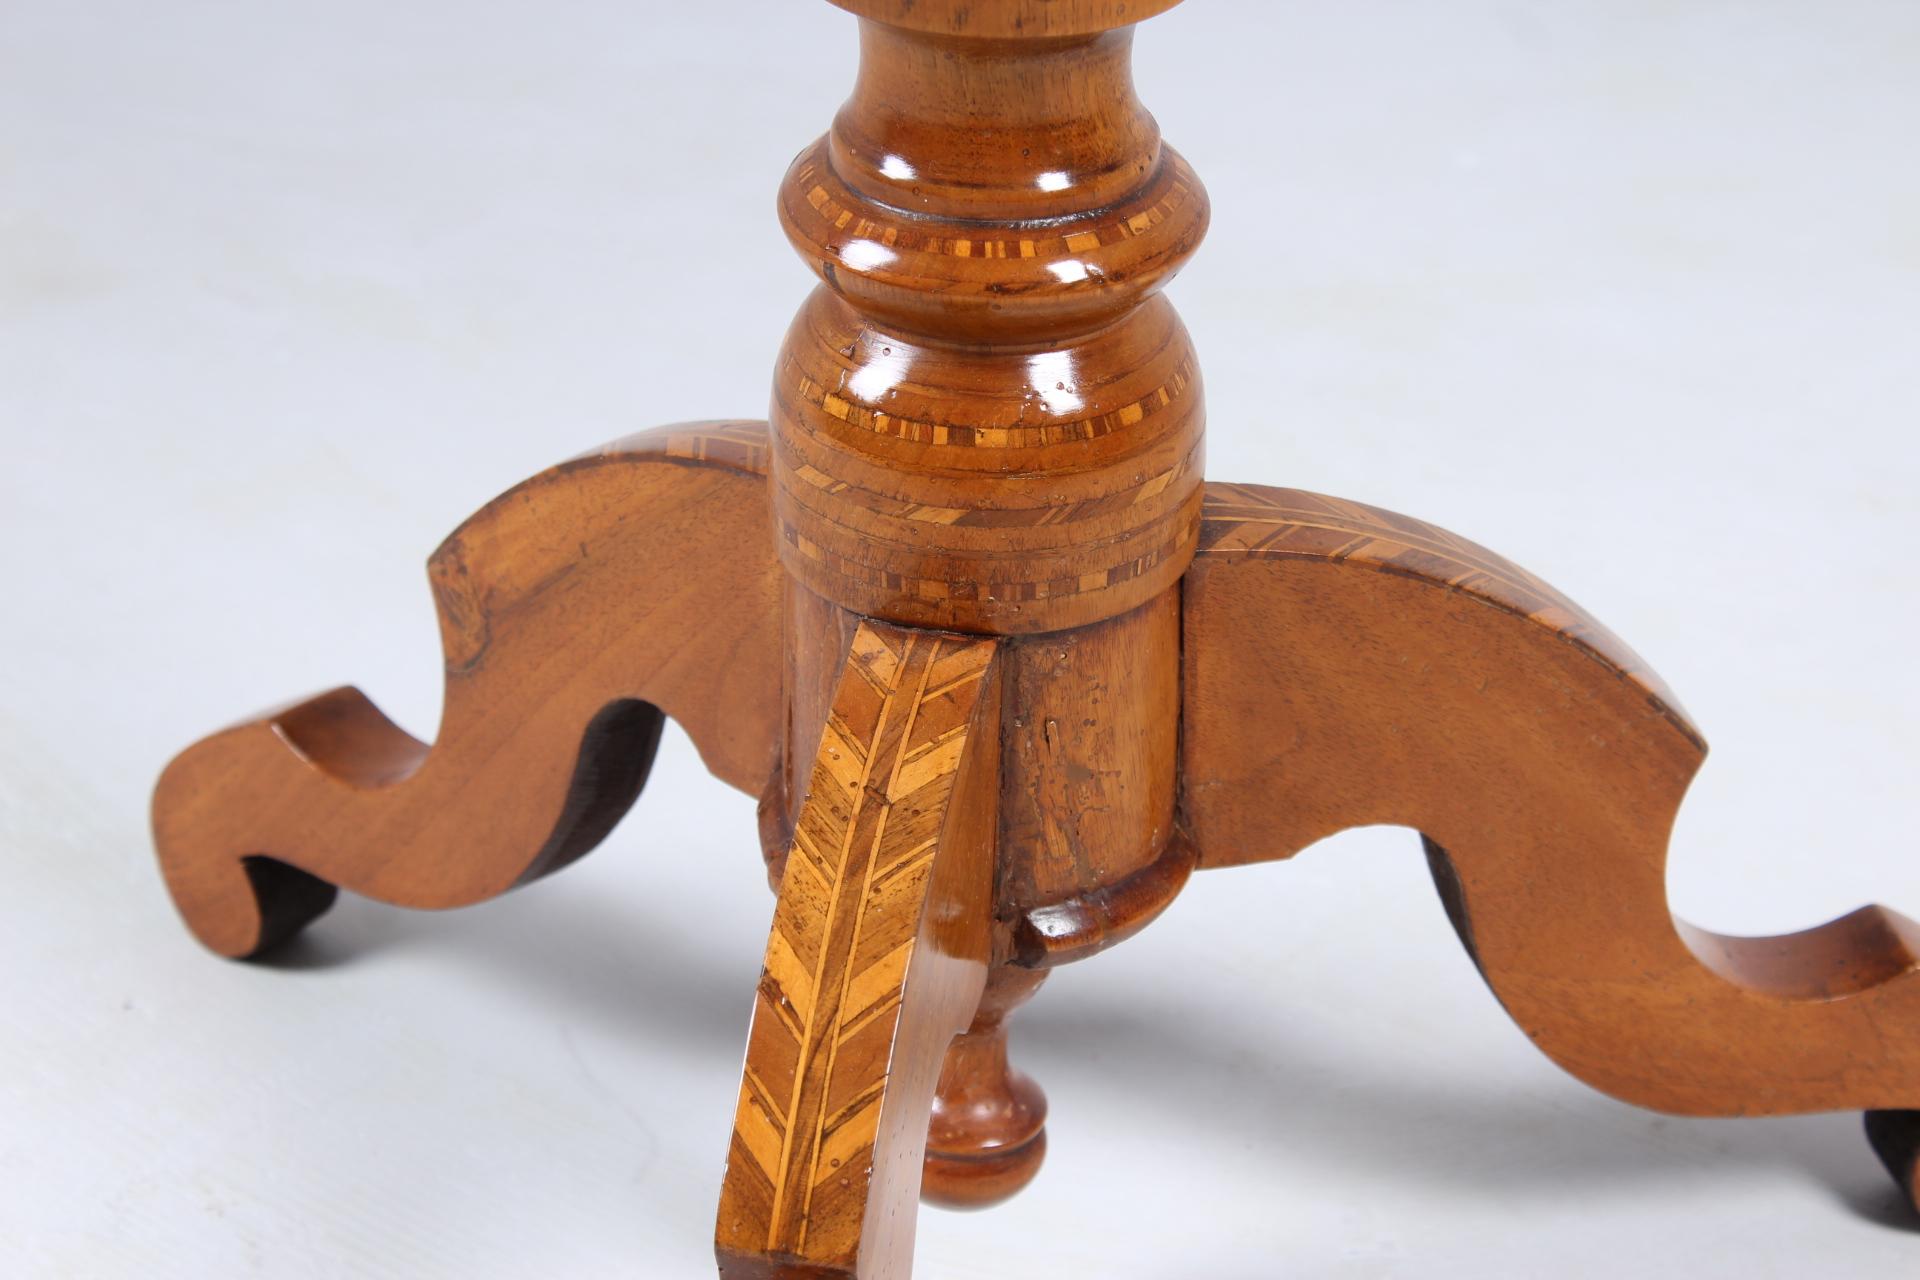 Antique chess table with set of chess pieces included

Italy (Sorrento)
Walnut etc.
19th century, Historism circa 1850

Dimensions:
H x W x D: 74 cm x 61 cm x 61 cm

Description:
Very richly inlaid and marked piece of furniture.
Tripod base. Curved